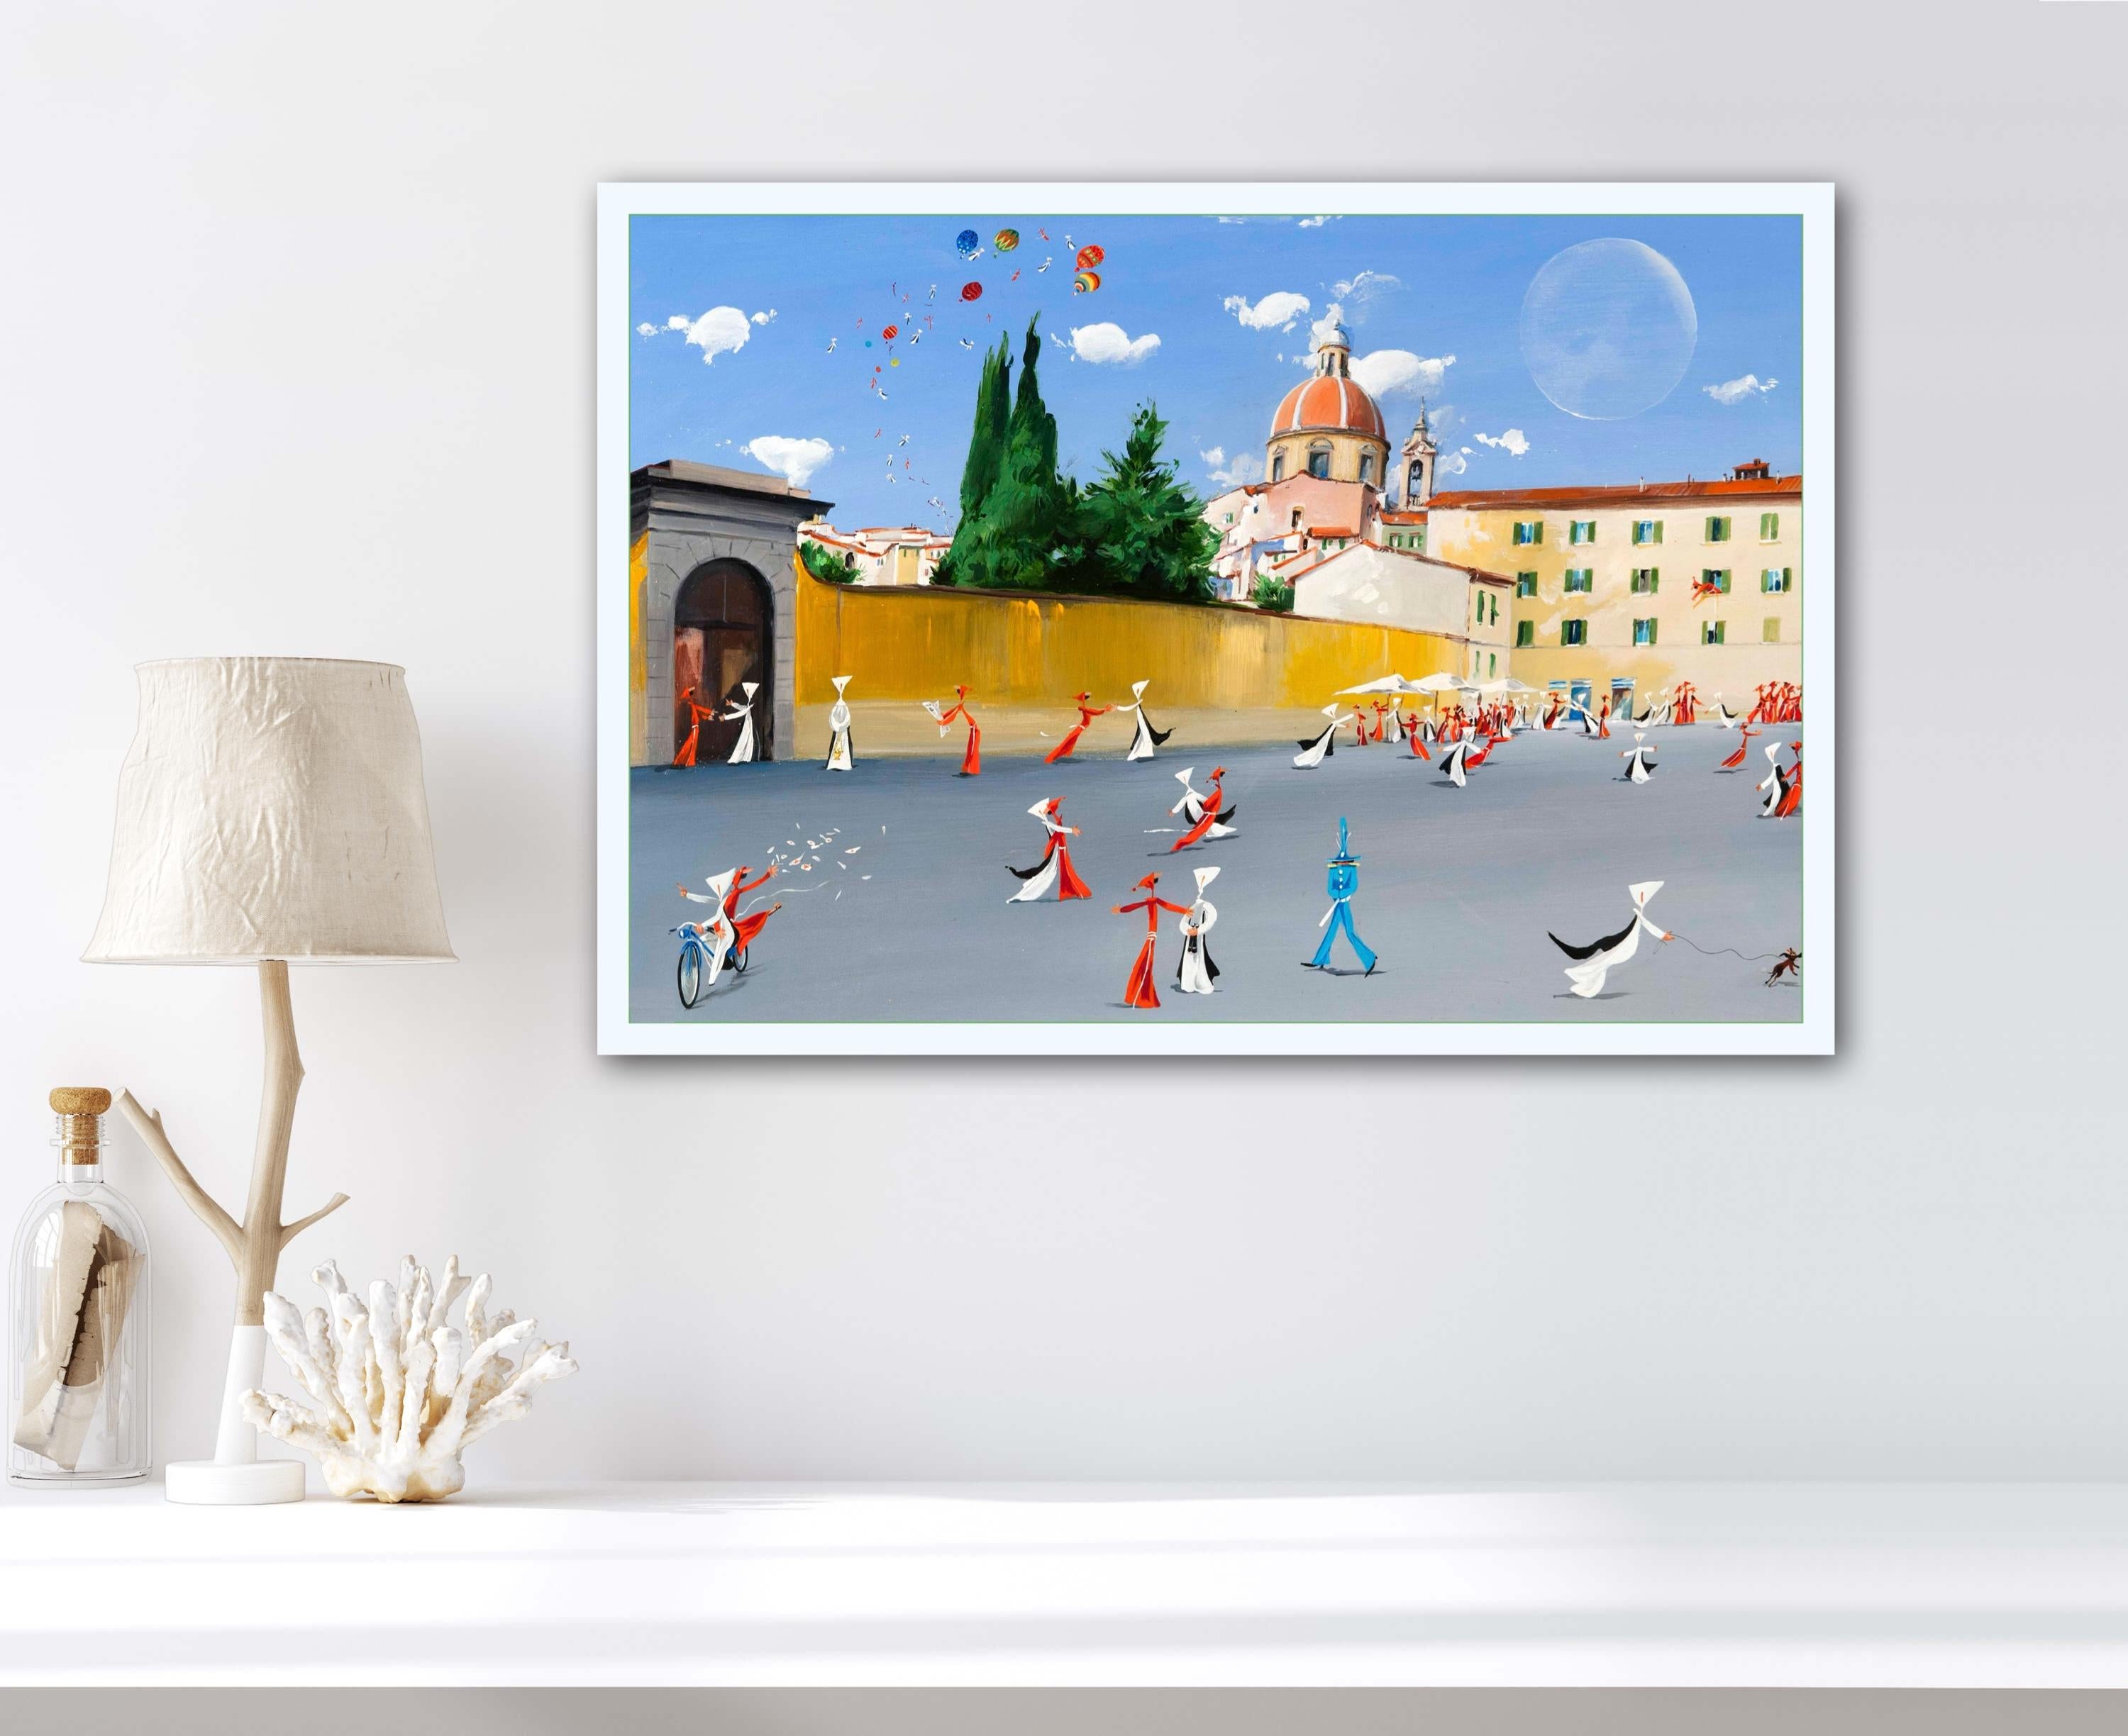 Carmine che piazza
Limited Edition series of 30
size: 43.6x60cm 

ULIVIERO ULIVIERI
Ulivieri's art is characterized by its spontaneous flow and precise lines.   His imagination is a key component of his journey, which 
he calls 'Strafantasie.'
As a